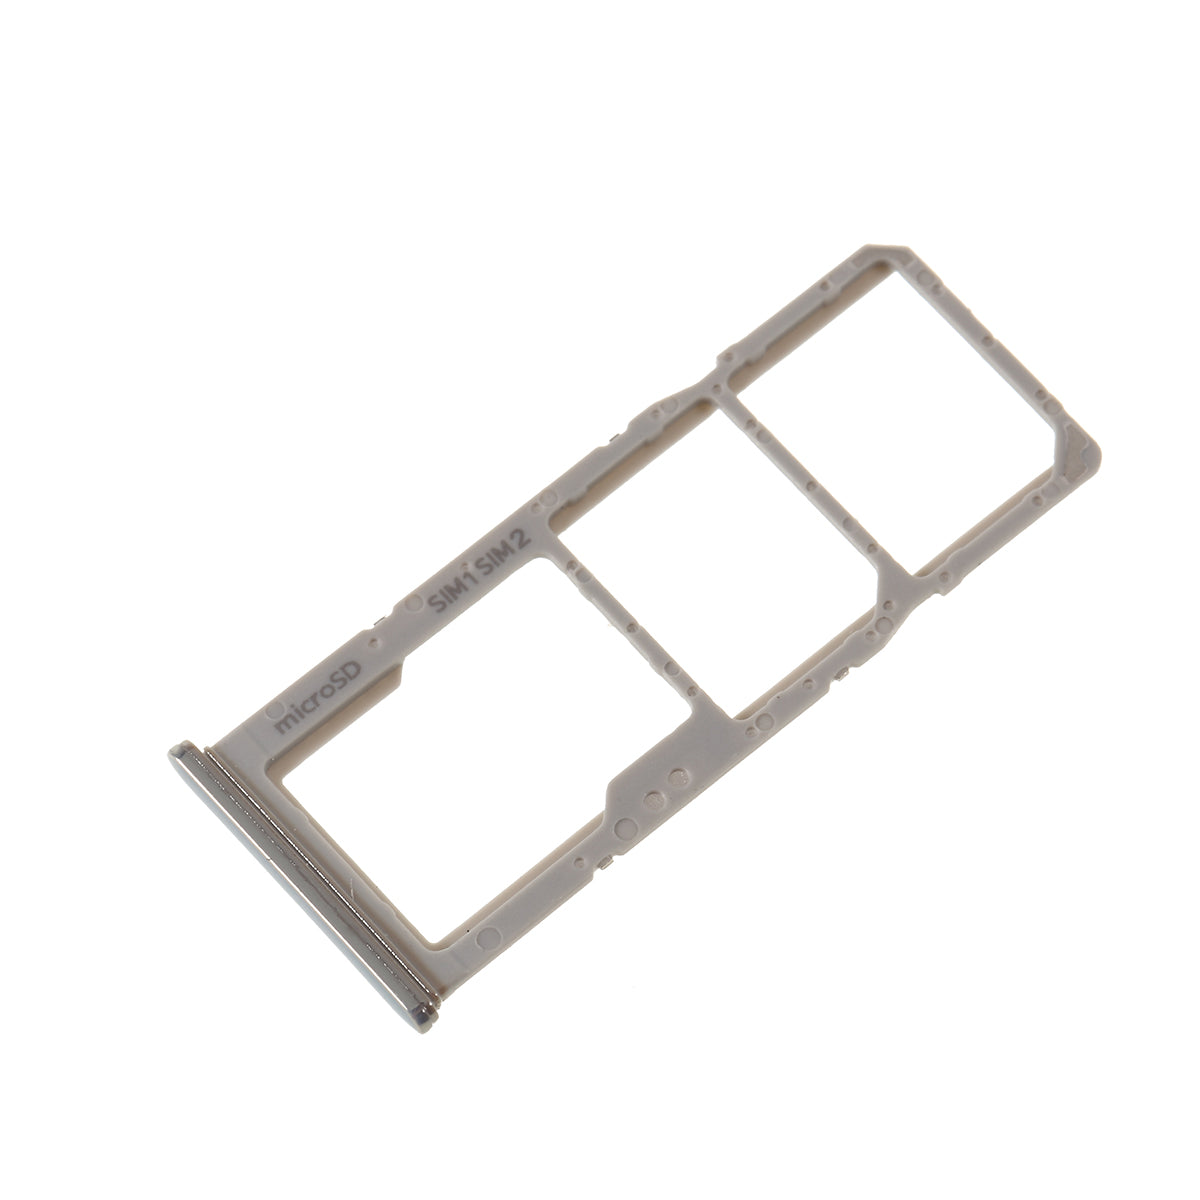 OEM Dual SIM Micro SD Card Tray Holder Replacement for Samsung Galaxy A50 SM-A505 / A30 SM-A305 - Silver